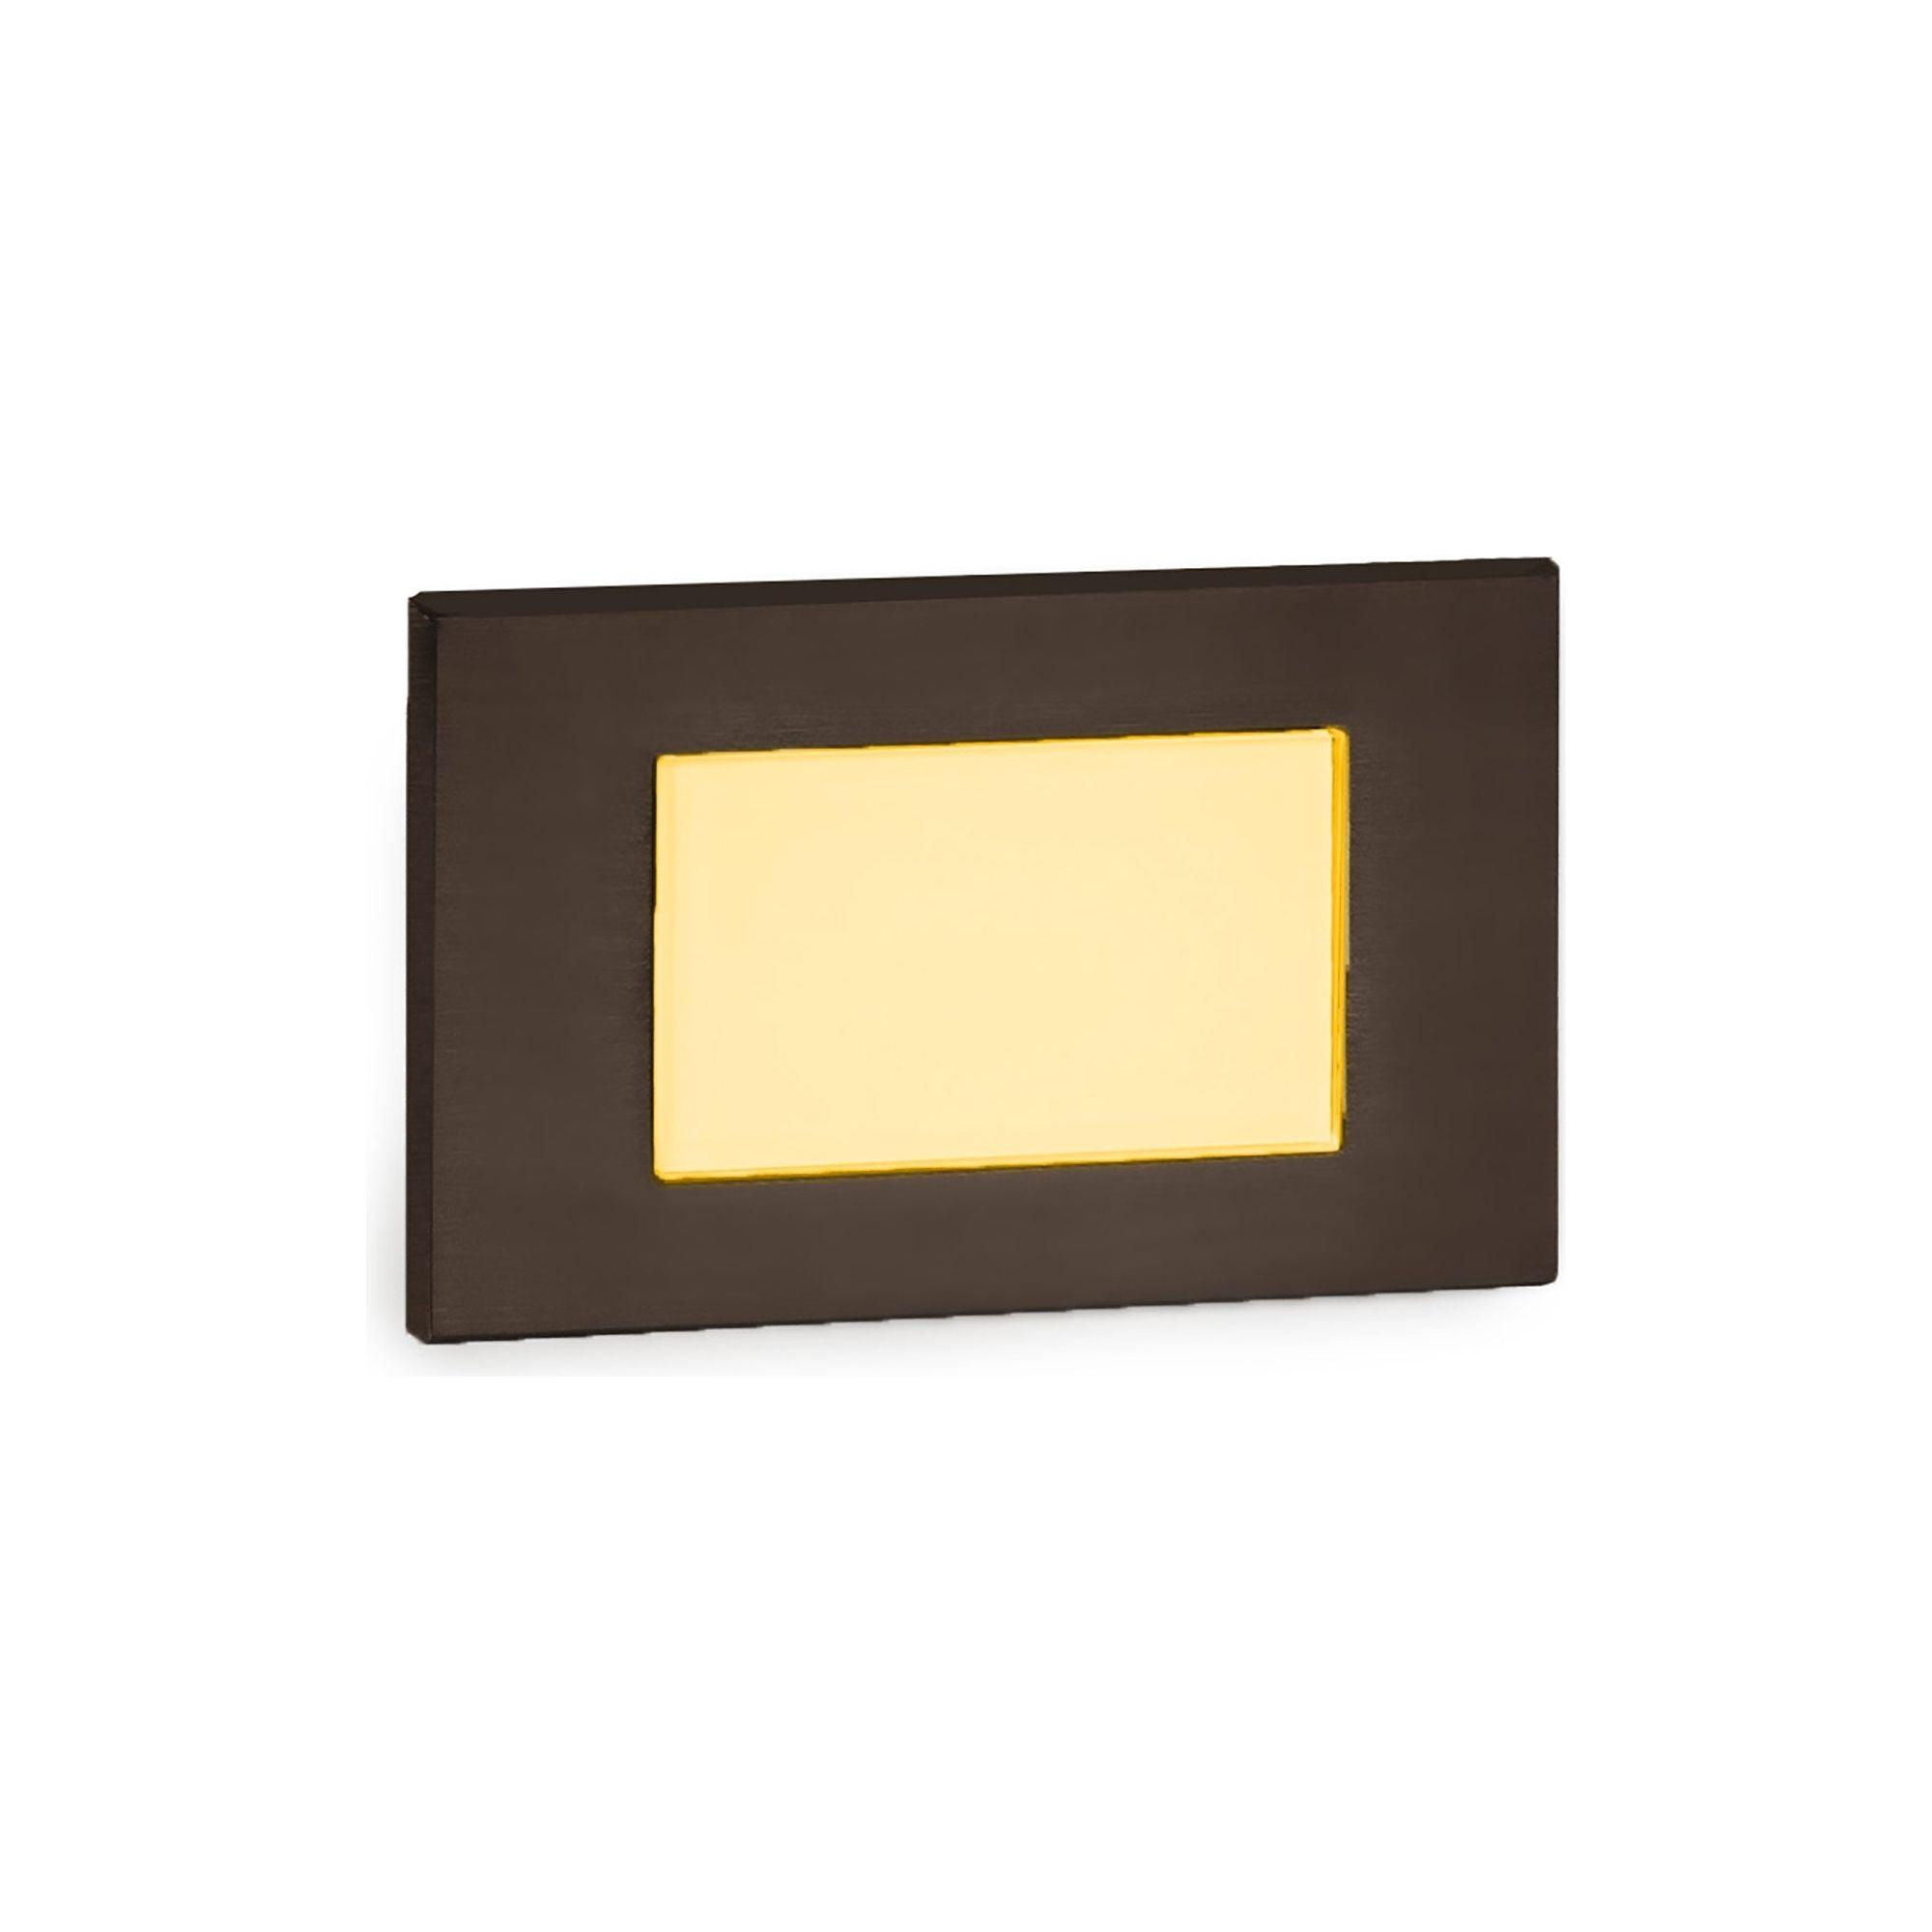 WAC Lighting - LED 12V Diffused Indoor/Outdoor Step and Wall Light - Lights Canada